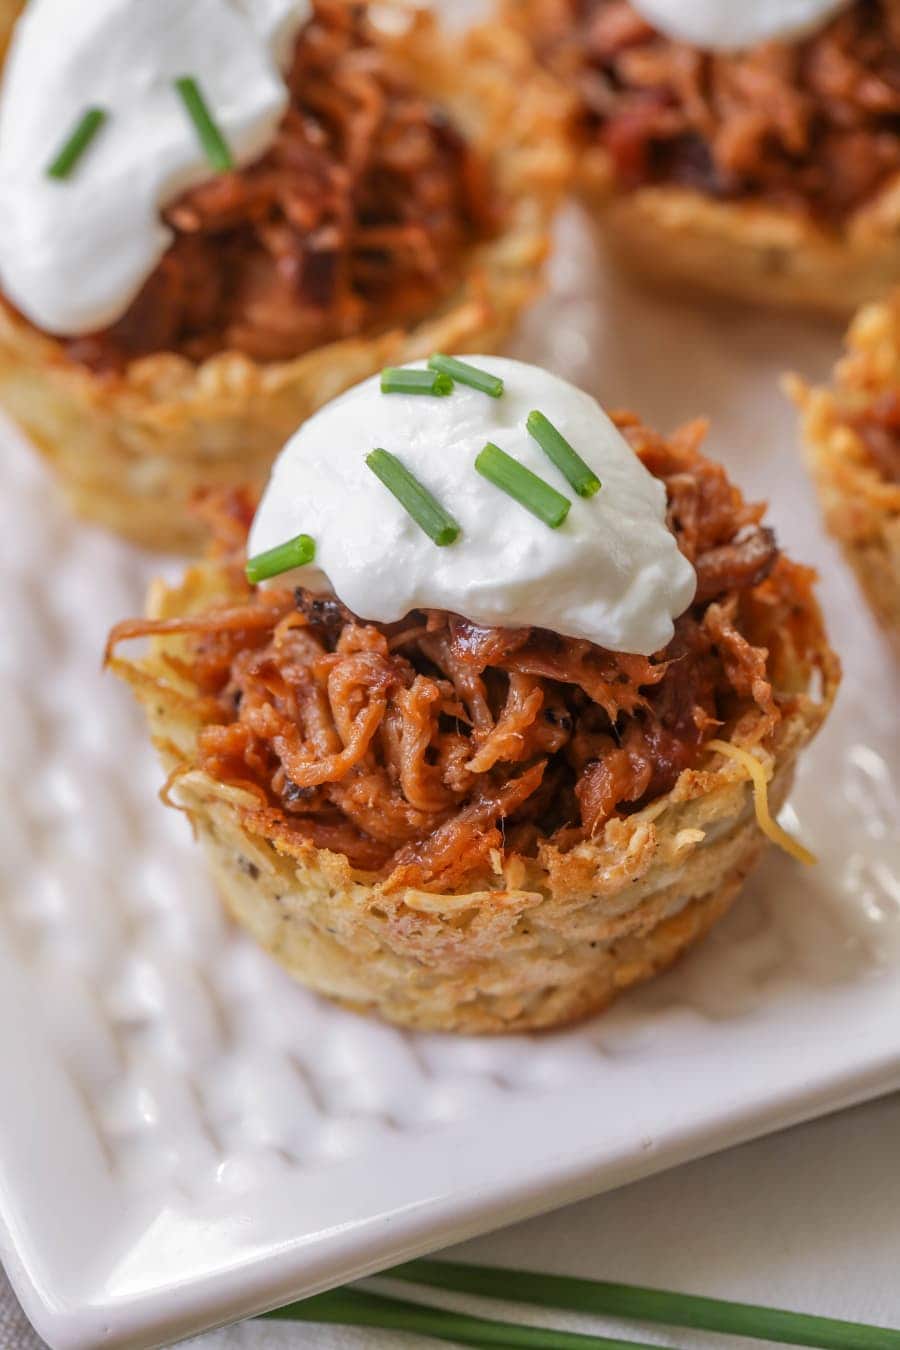 Loaded Pulled Pork Cups are topped with sour cream.